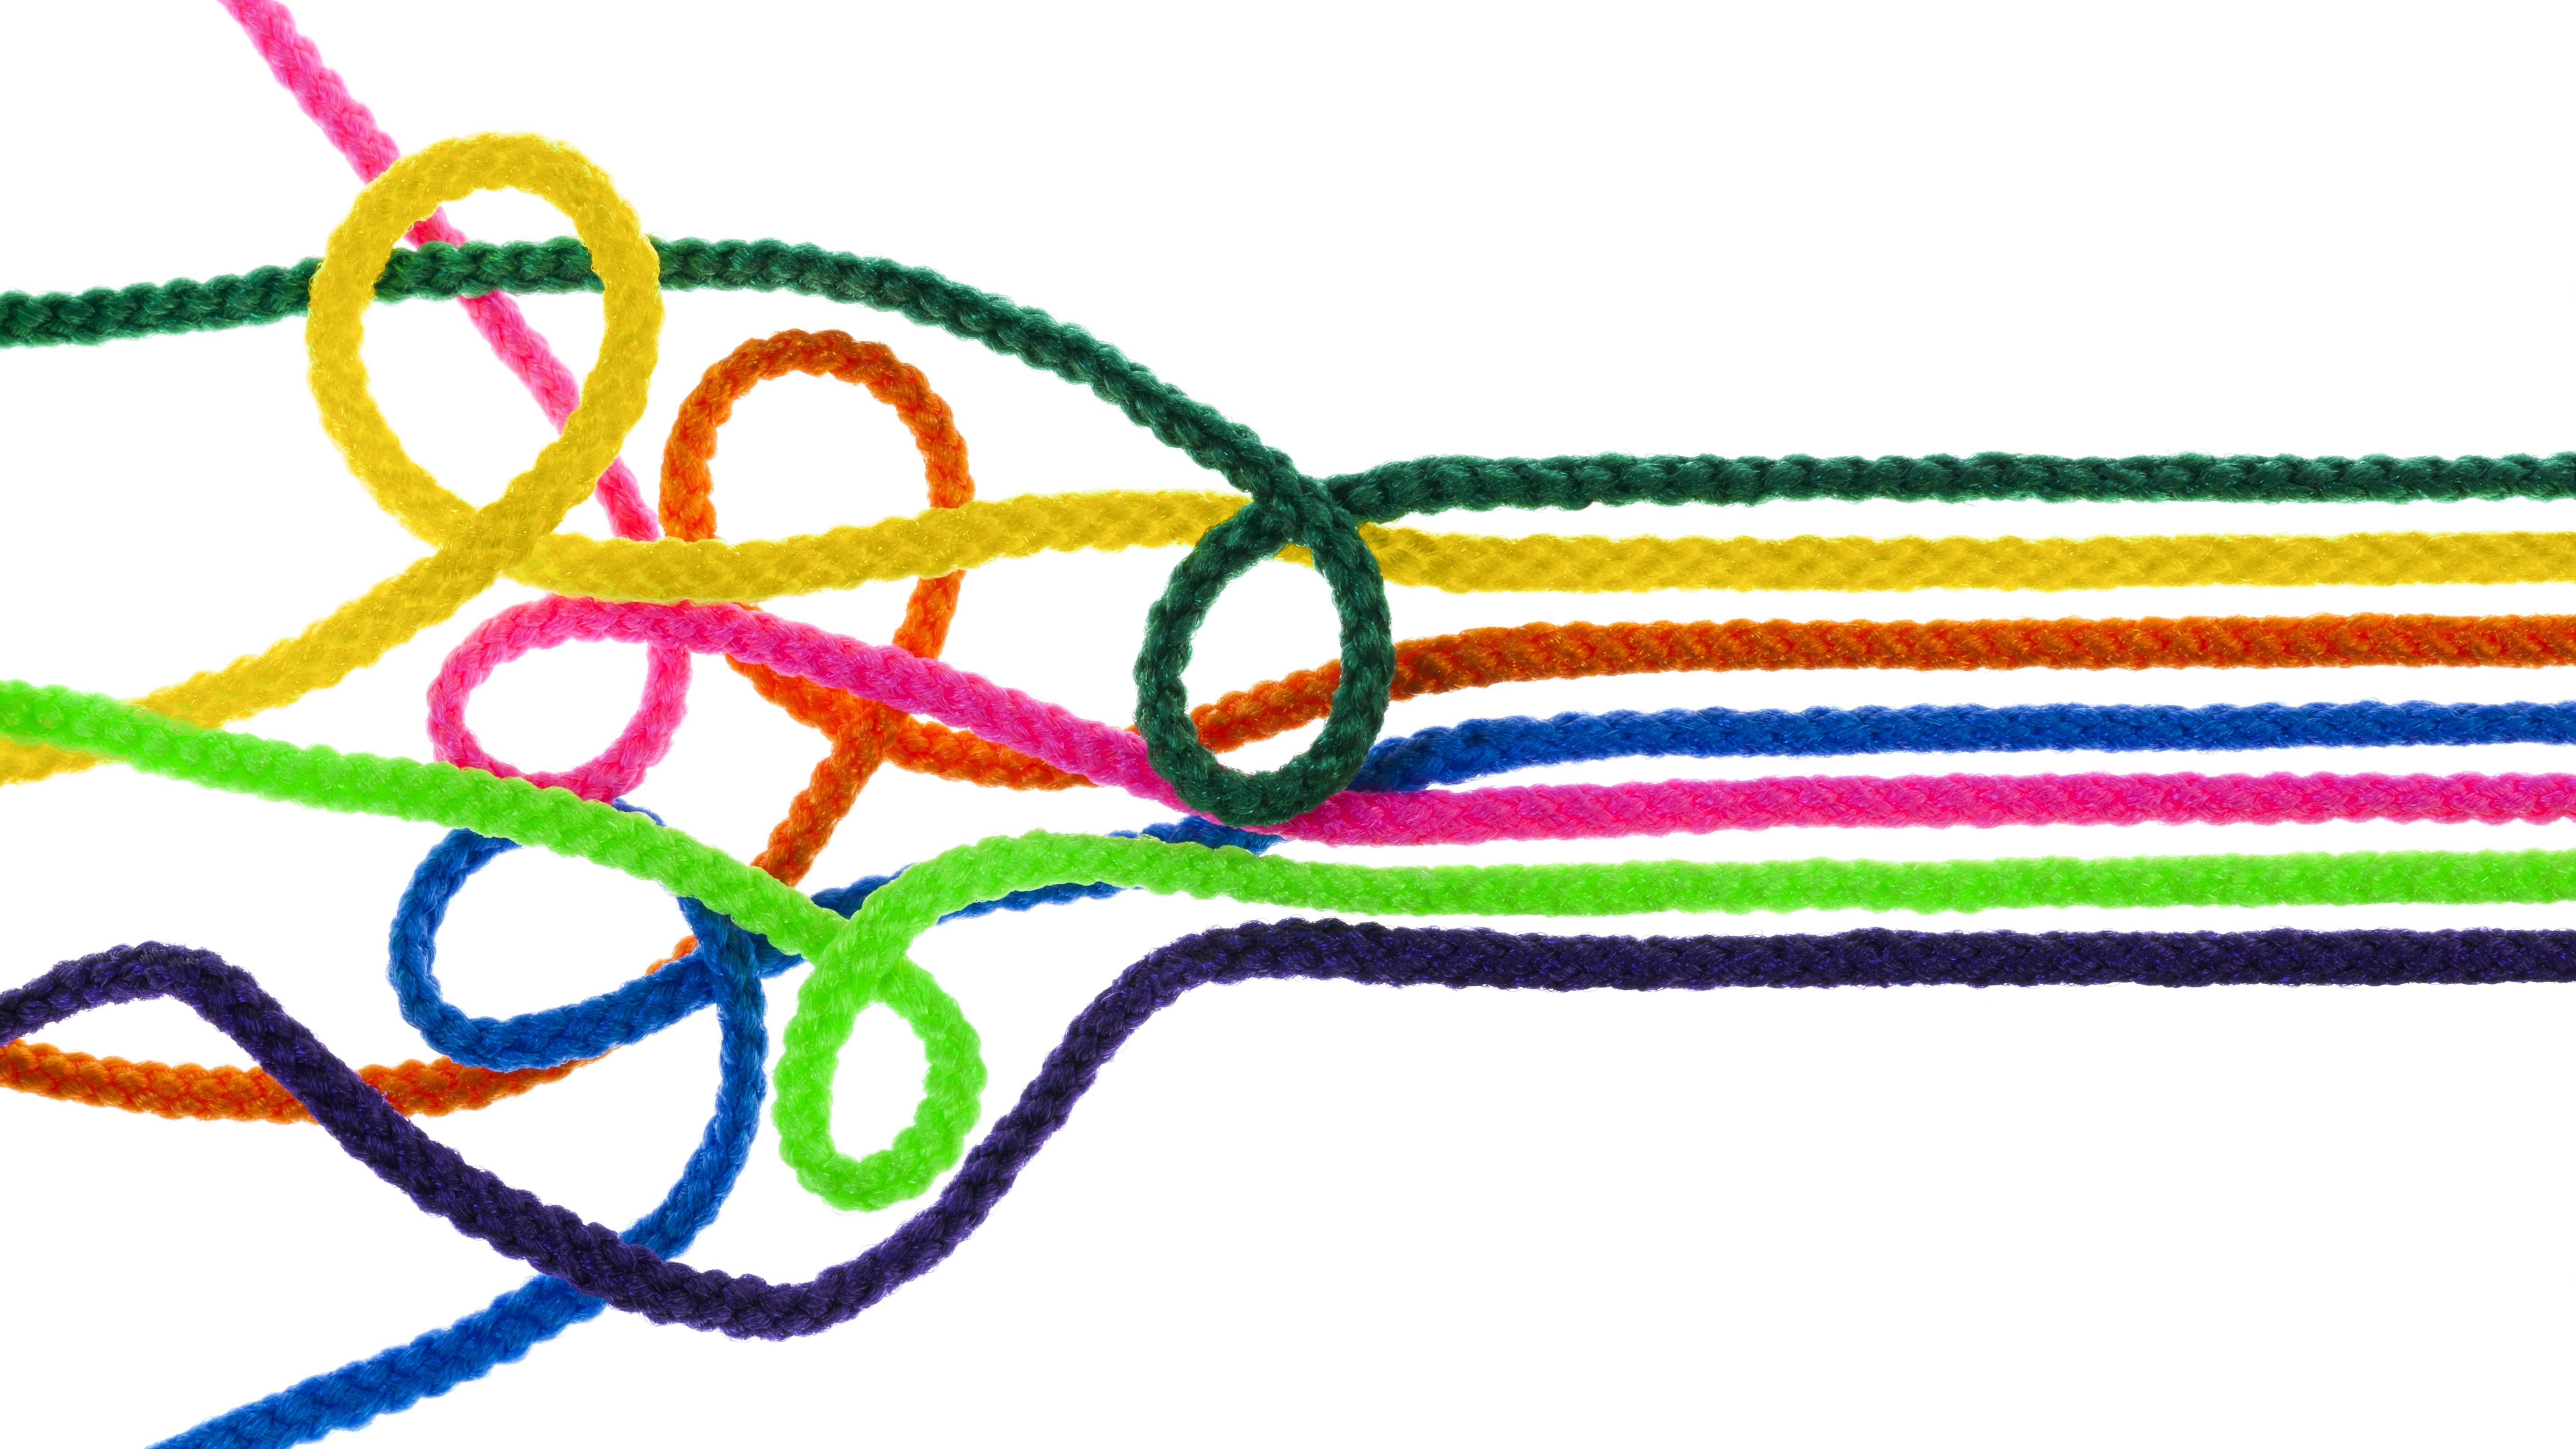 untie knot rope tangle mess rainbow